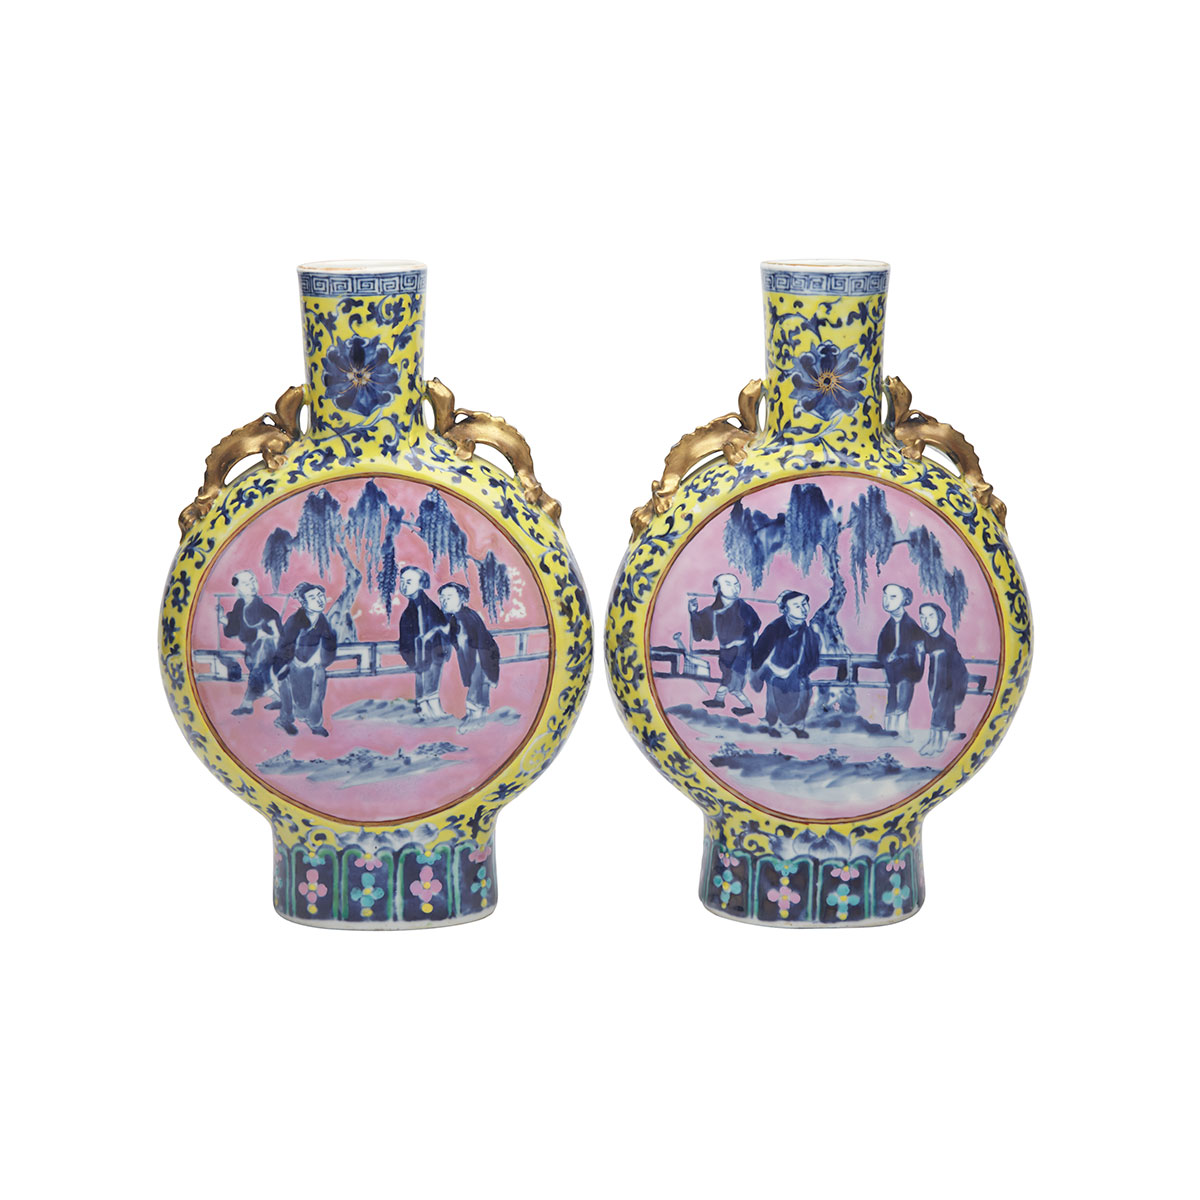 Pair of Blue and White Moonflasks, 19th Century